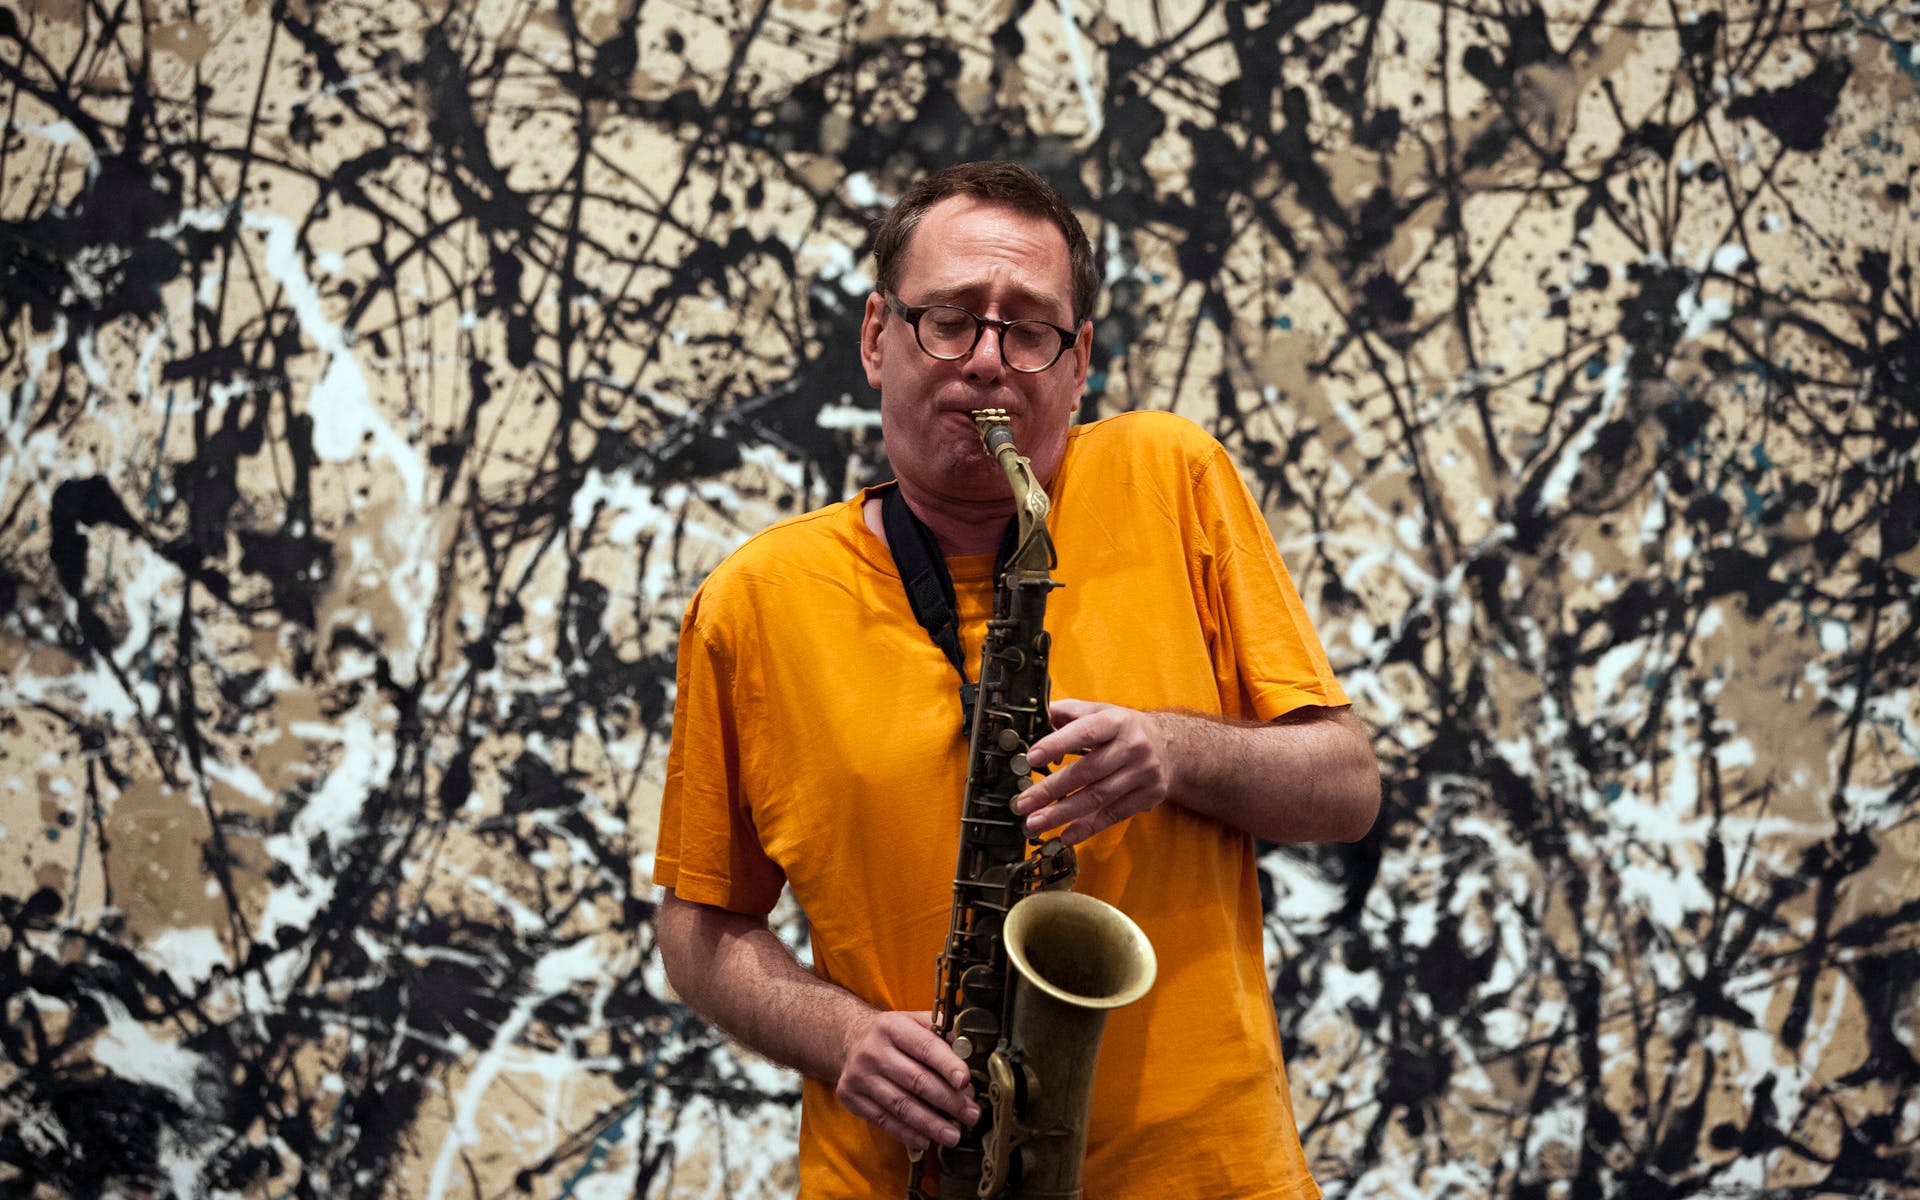 John Zorn plays an alto saxophone in front of a Jackson Pollock painting.